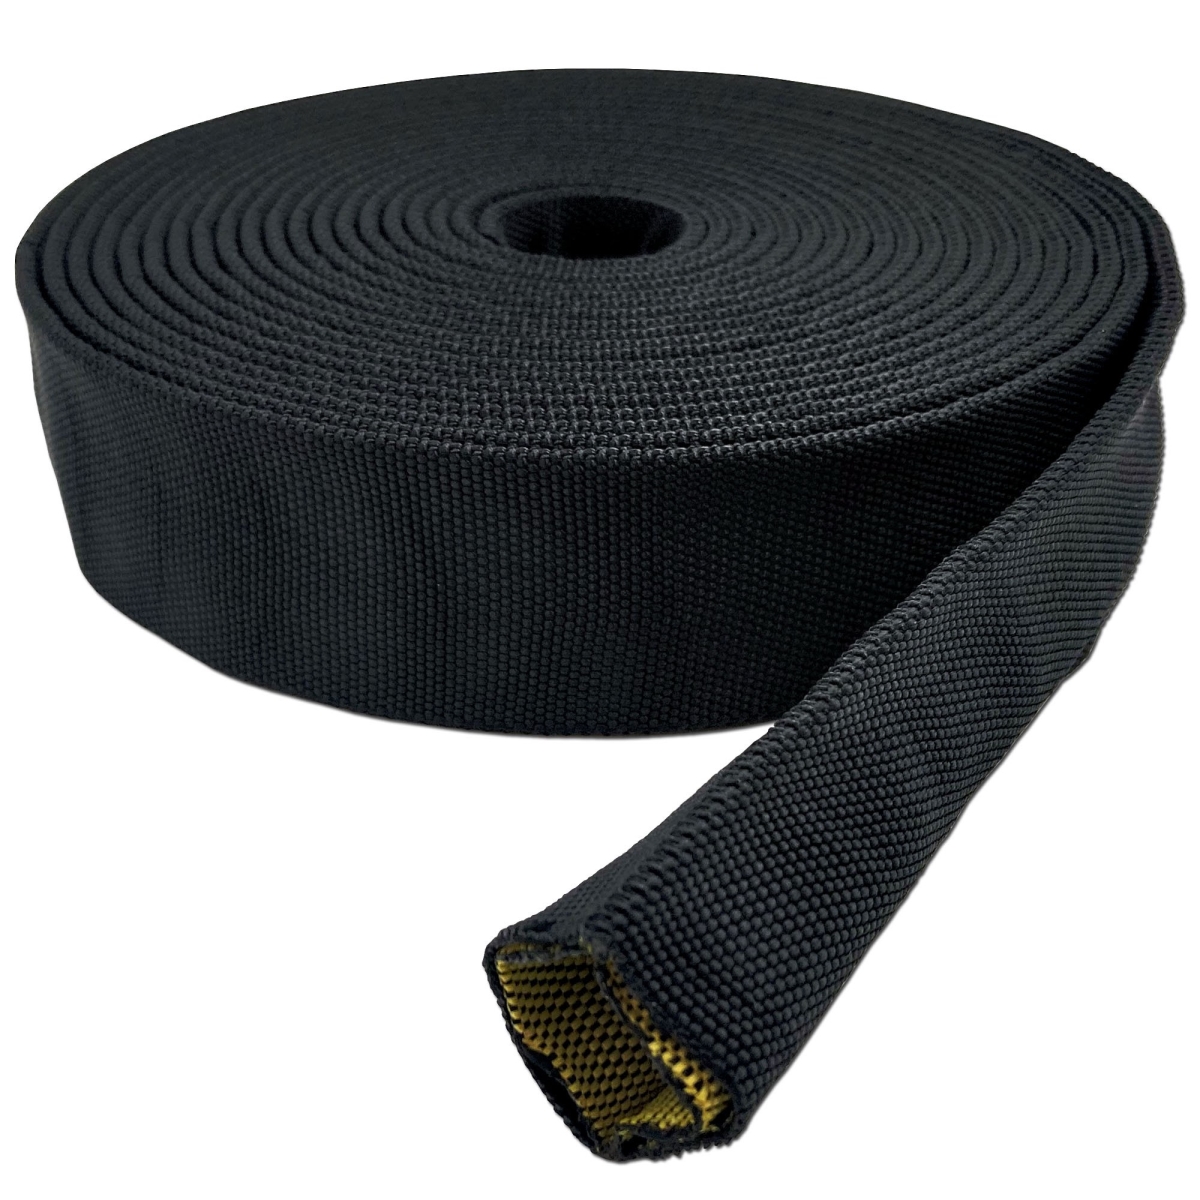 Picture of Electriduct BS-J-BURST-400-25-BK 4 in. x 25 ft. Burst Protection Multifilament Nylon Braided Sleeving - Black